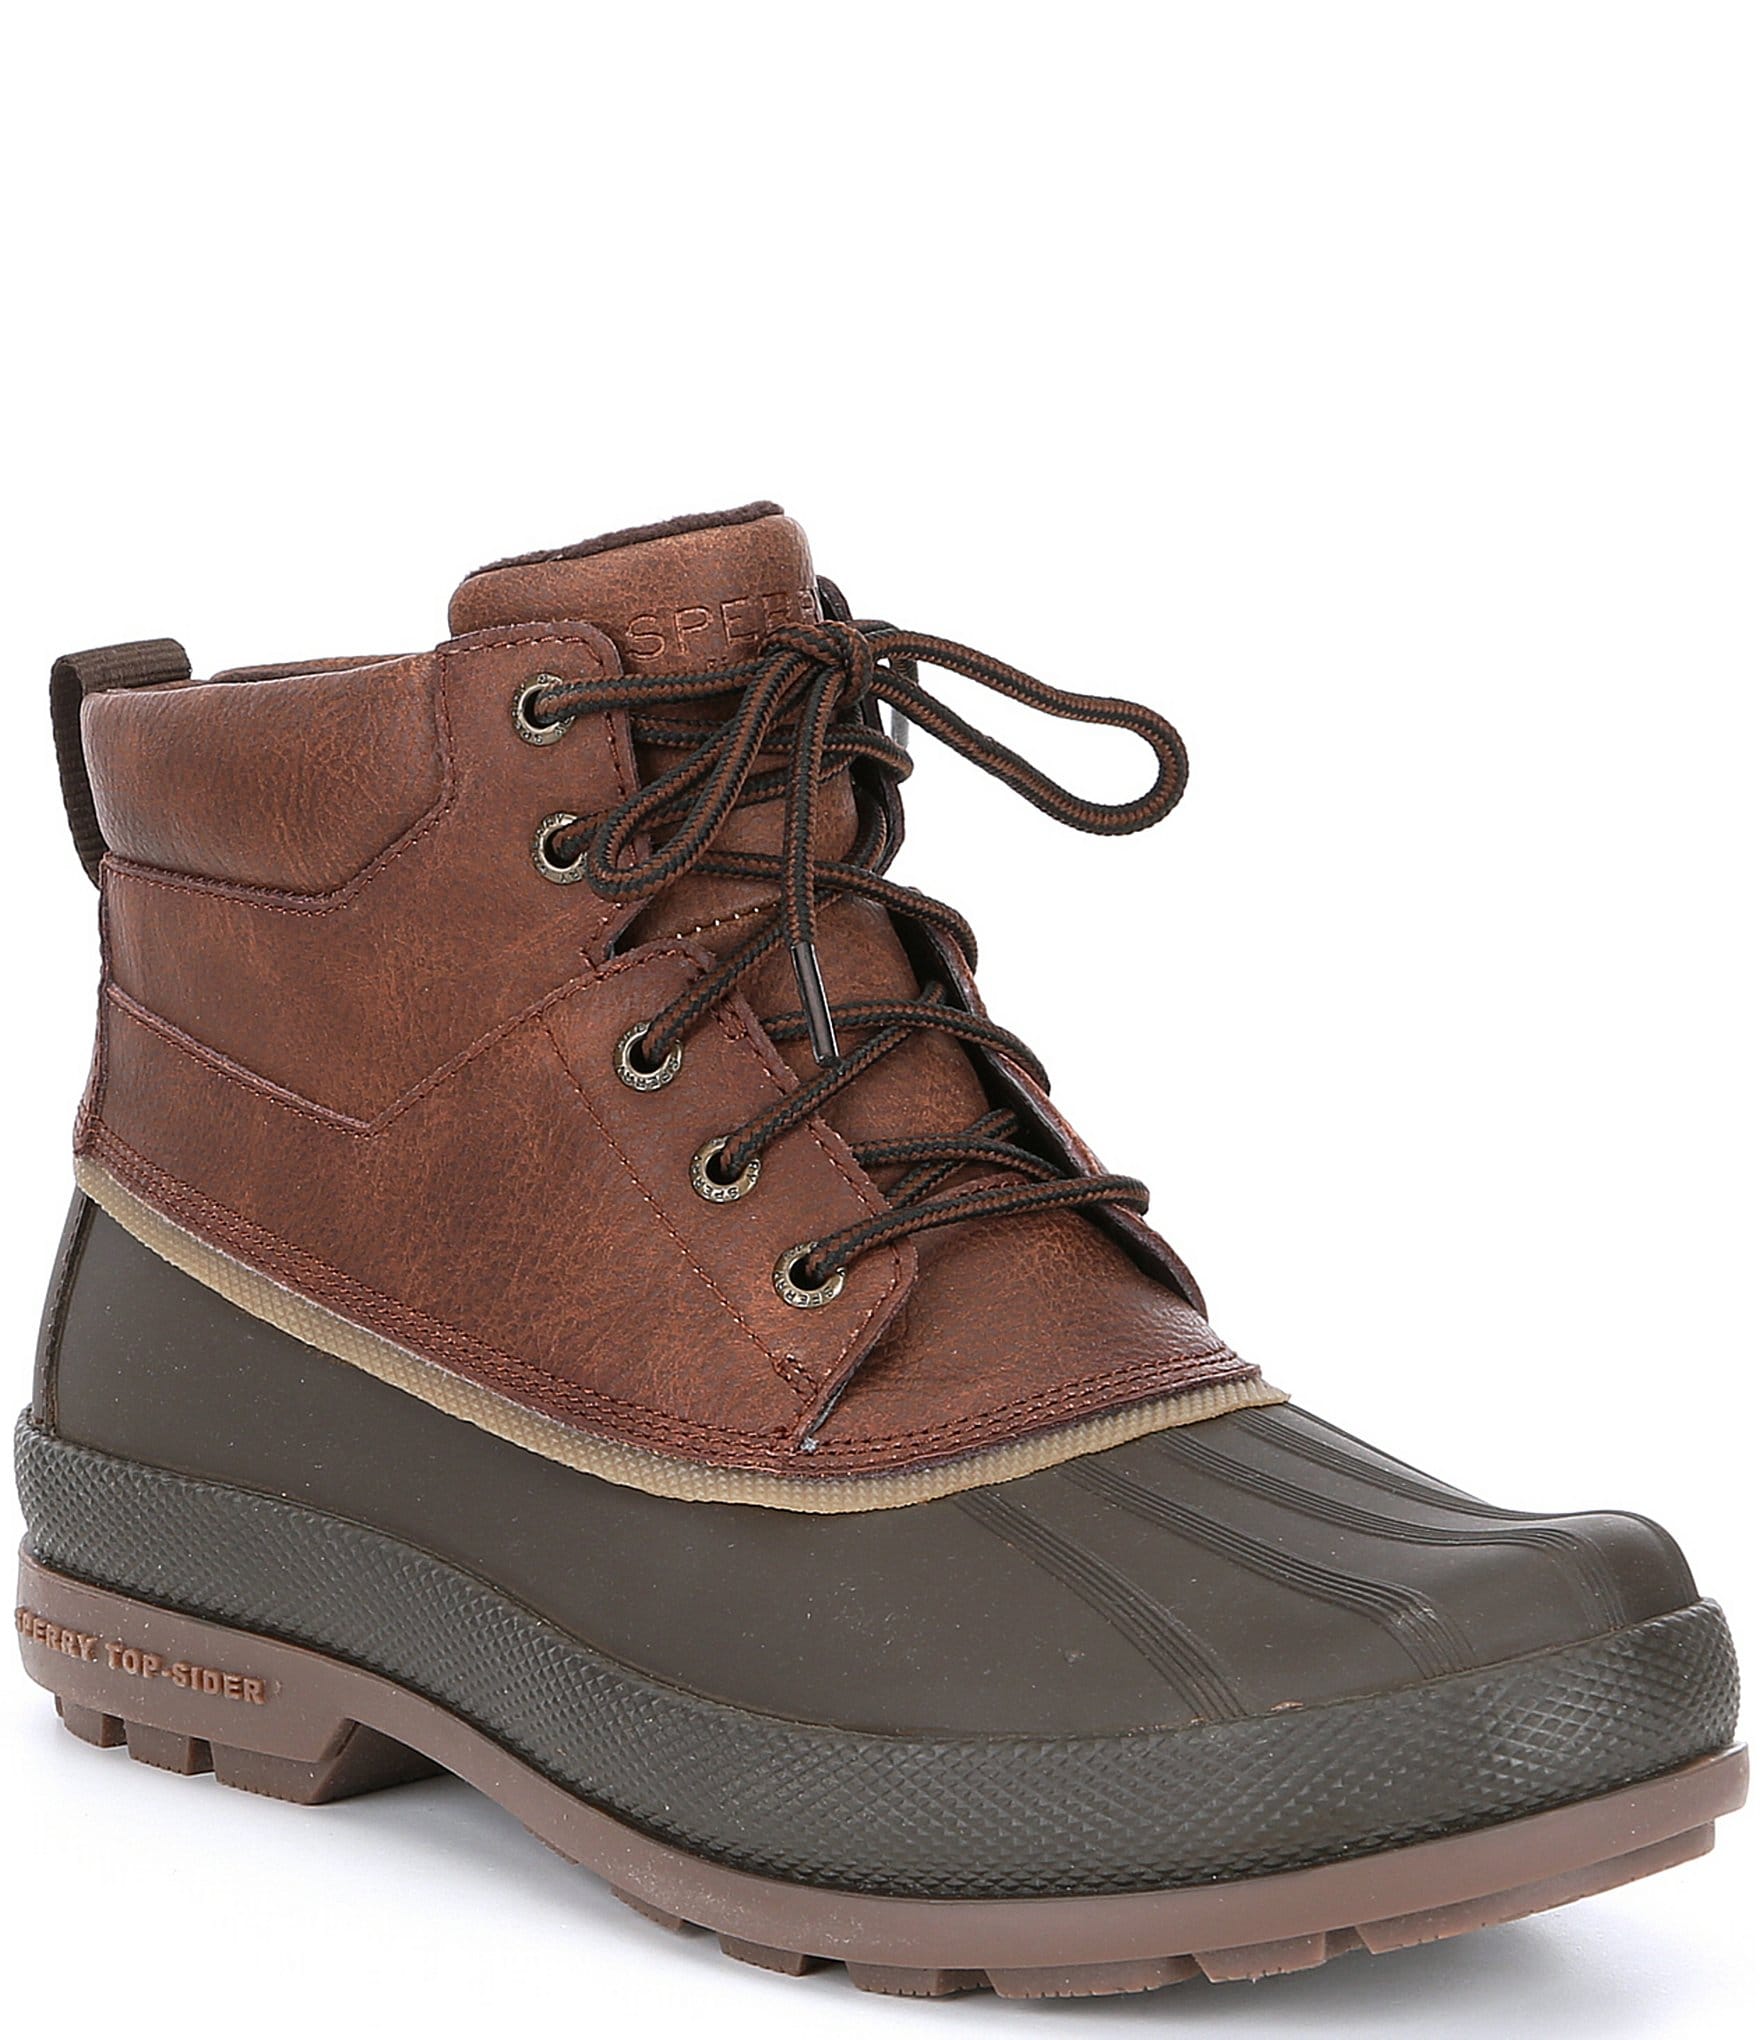 Sperry Men's Cold Bay Chukka Boot - 11.5 - Brown /Coffee